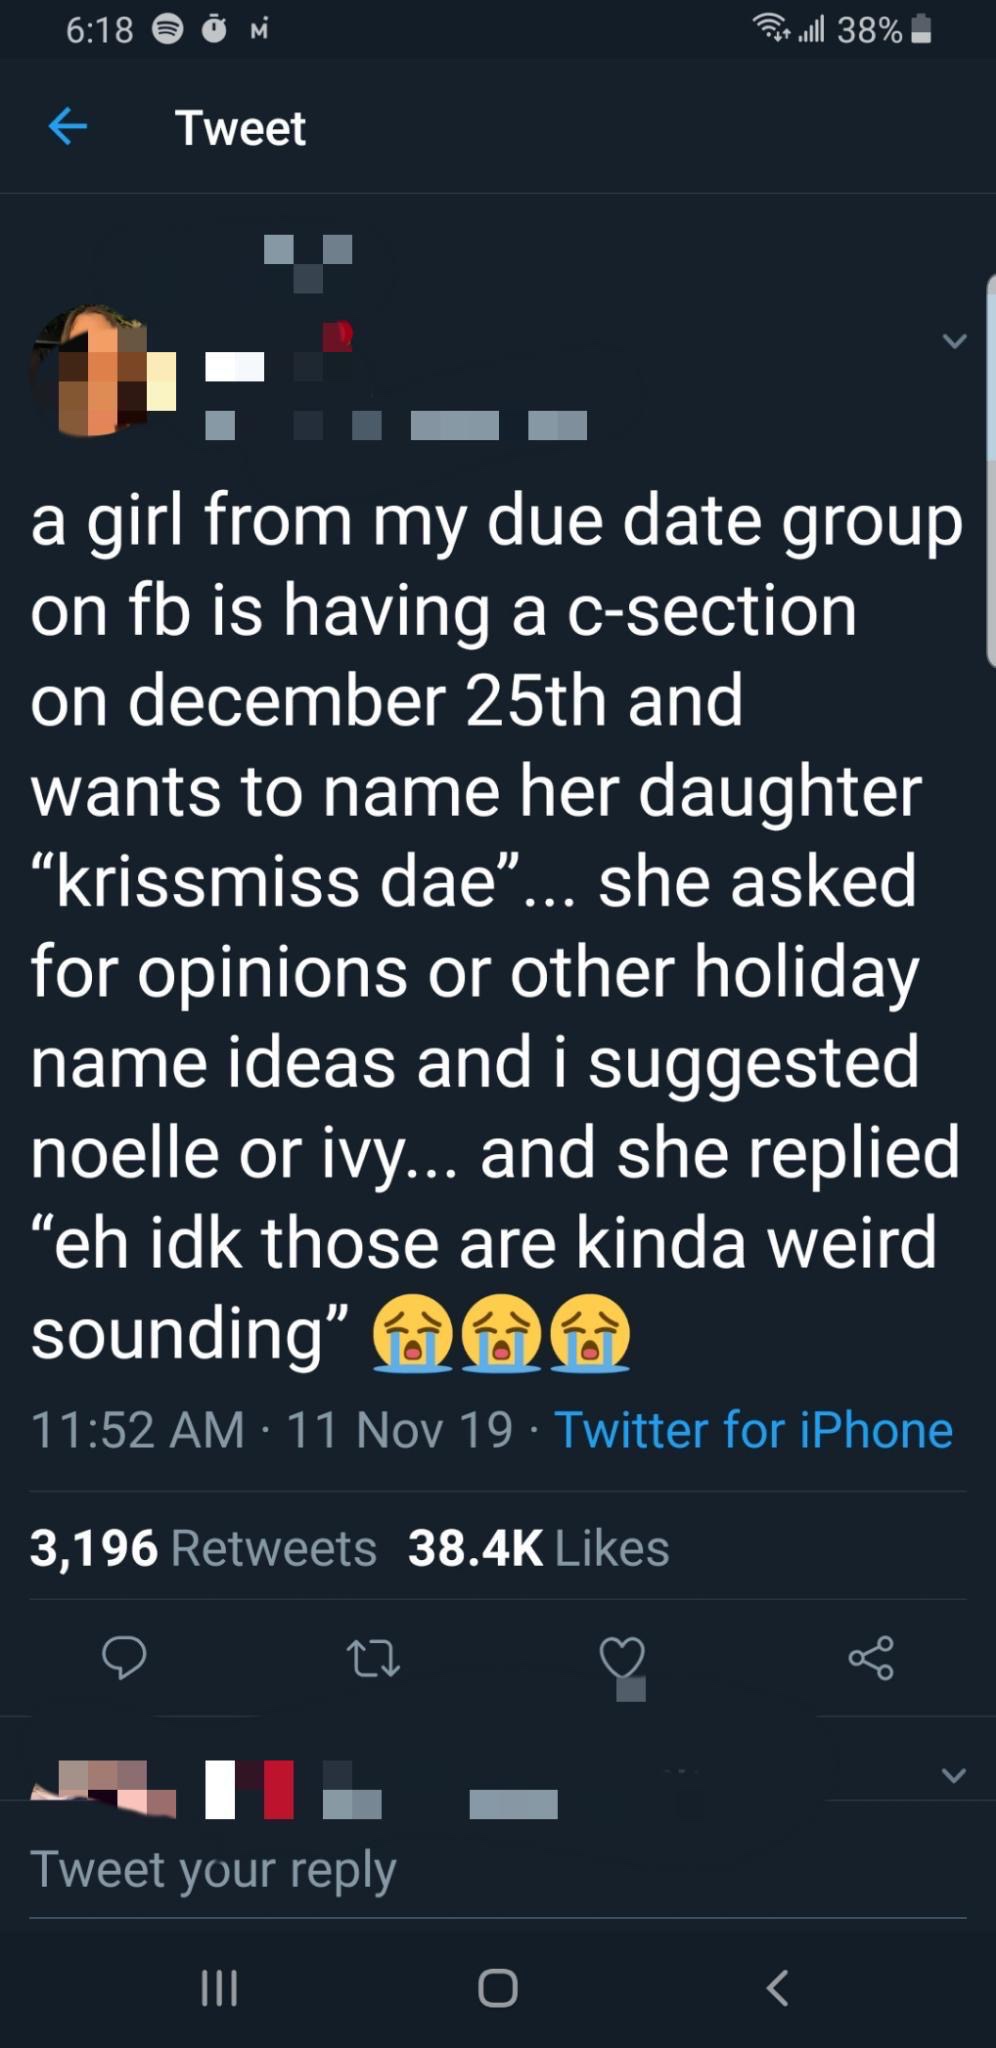 screenshot - @ Mi Phot Jill 38% f Tweet 1 a girl from my due date group on fb is having a csection on december 25th and wants to name her daughter krissmiss dae... she asked for opinions or other holiday name ideas and i suggested noelle or ivy... and she